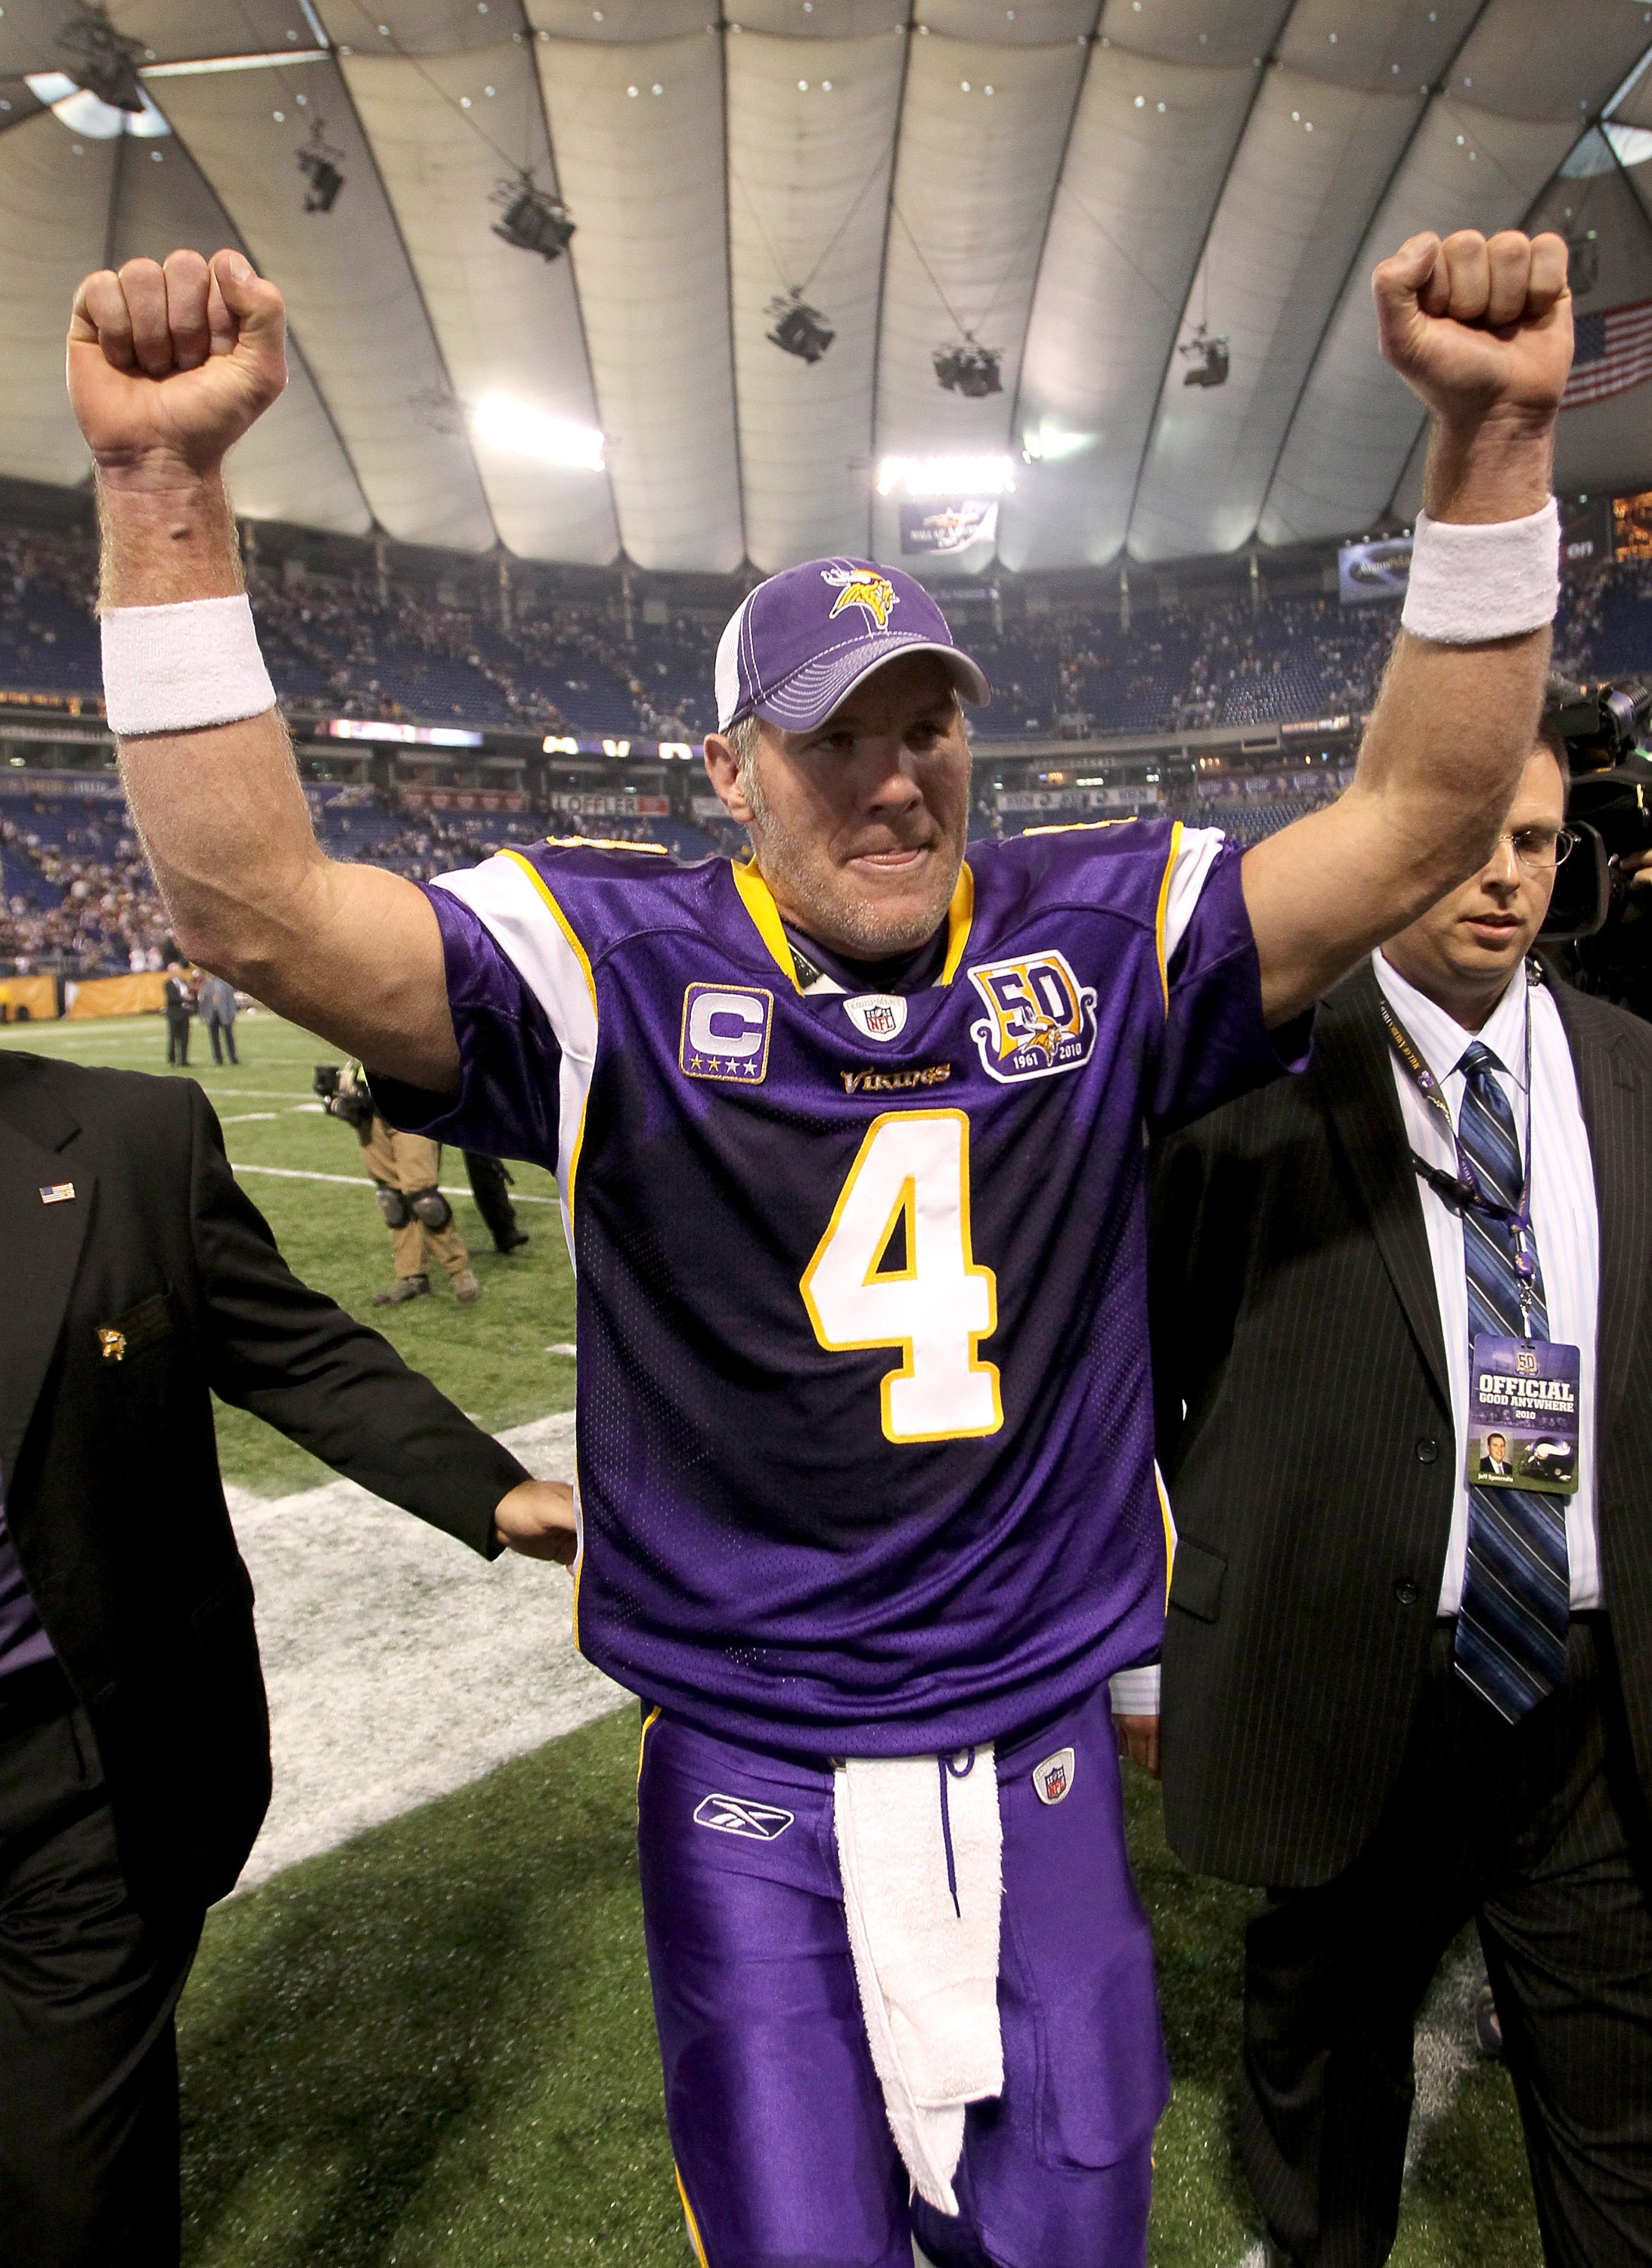 MINNEAPOLIS - NOVEMBER 07:  Quarterback Brett Favre #4 of the Minnesota Vikings celebrates as he leaves the field after the game with the Arizona Cardinals at Hubert H. Humphrey Metrodome on November 7, 2010 in Minneapolis, Minnesota.  The Vikings won 27-